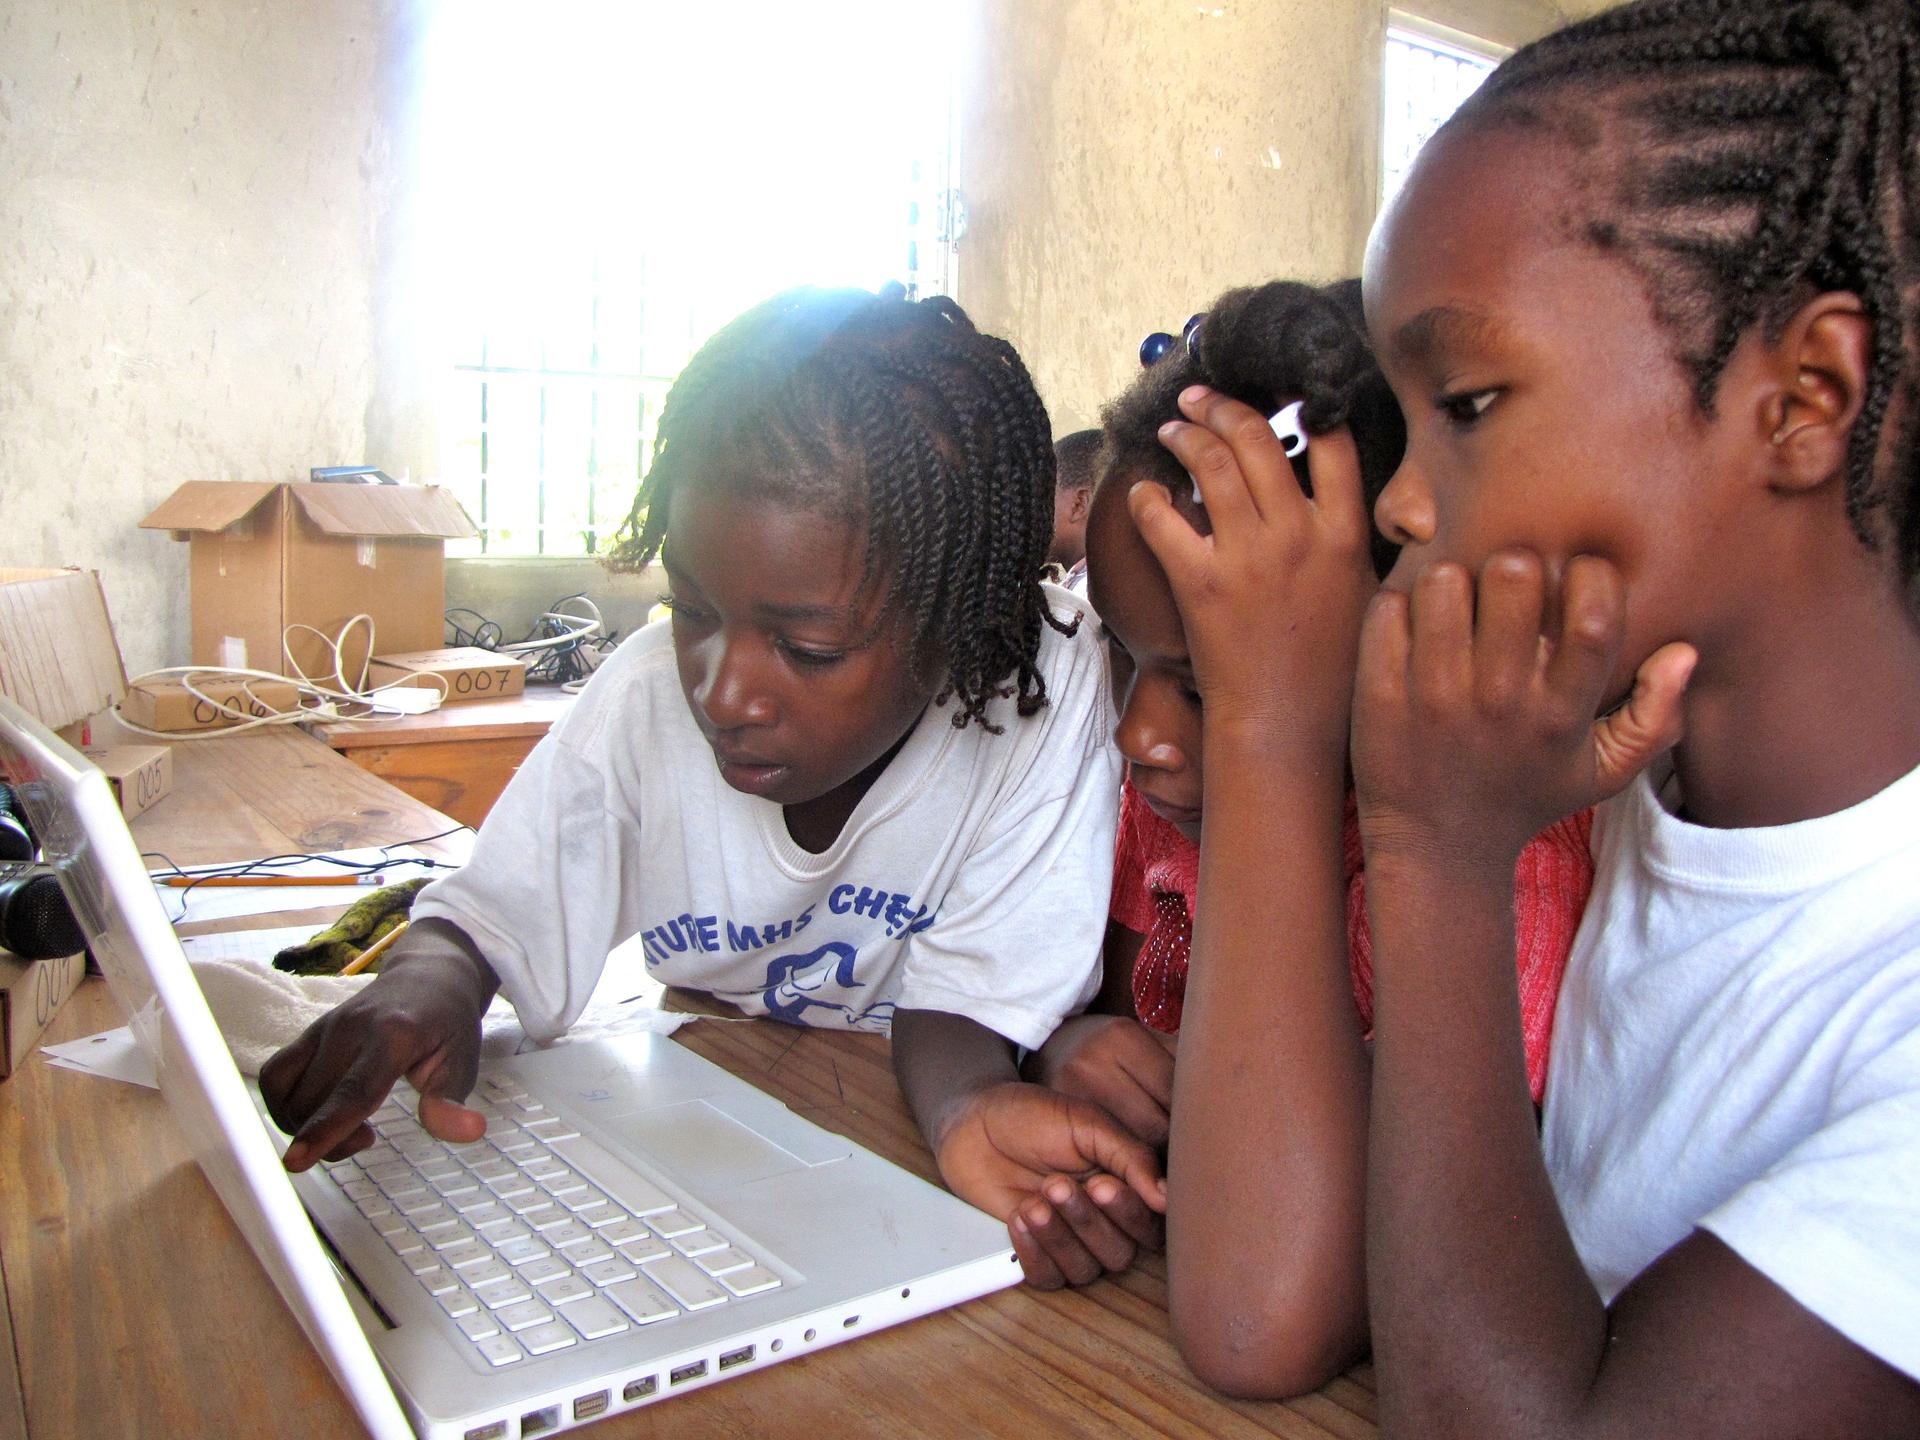 Frandy Calixte, at right, and classmates at the Matenwa Community School learn numeration by playing a pirate video game translated into Creole by linguist Michel DeGraff and his team at MIT.